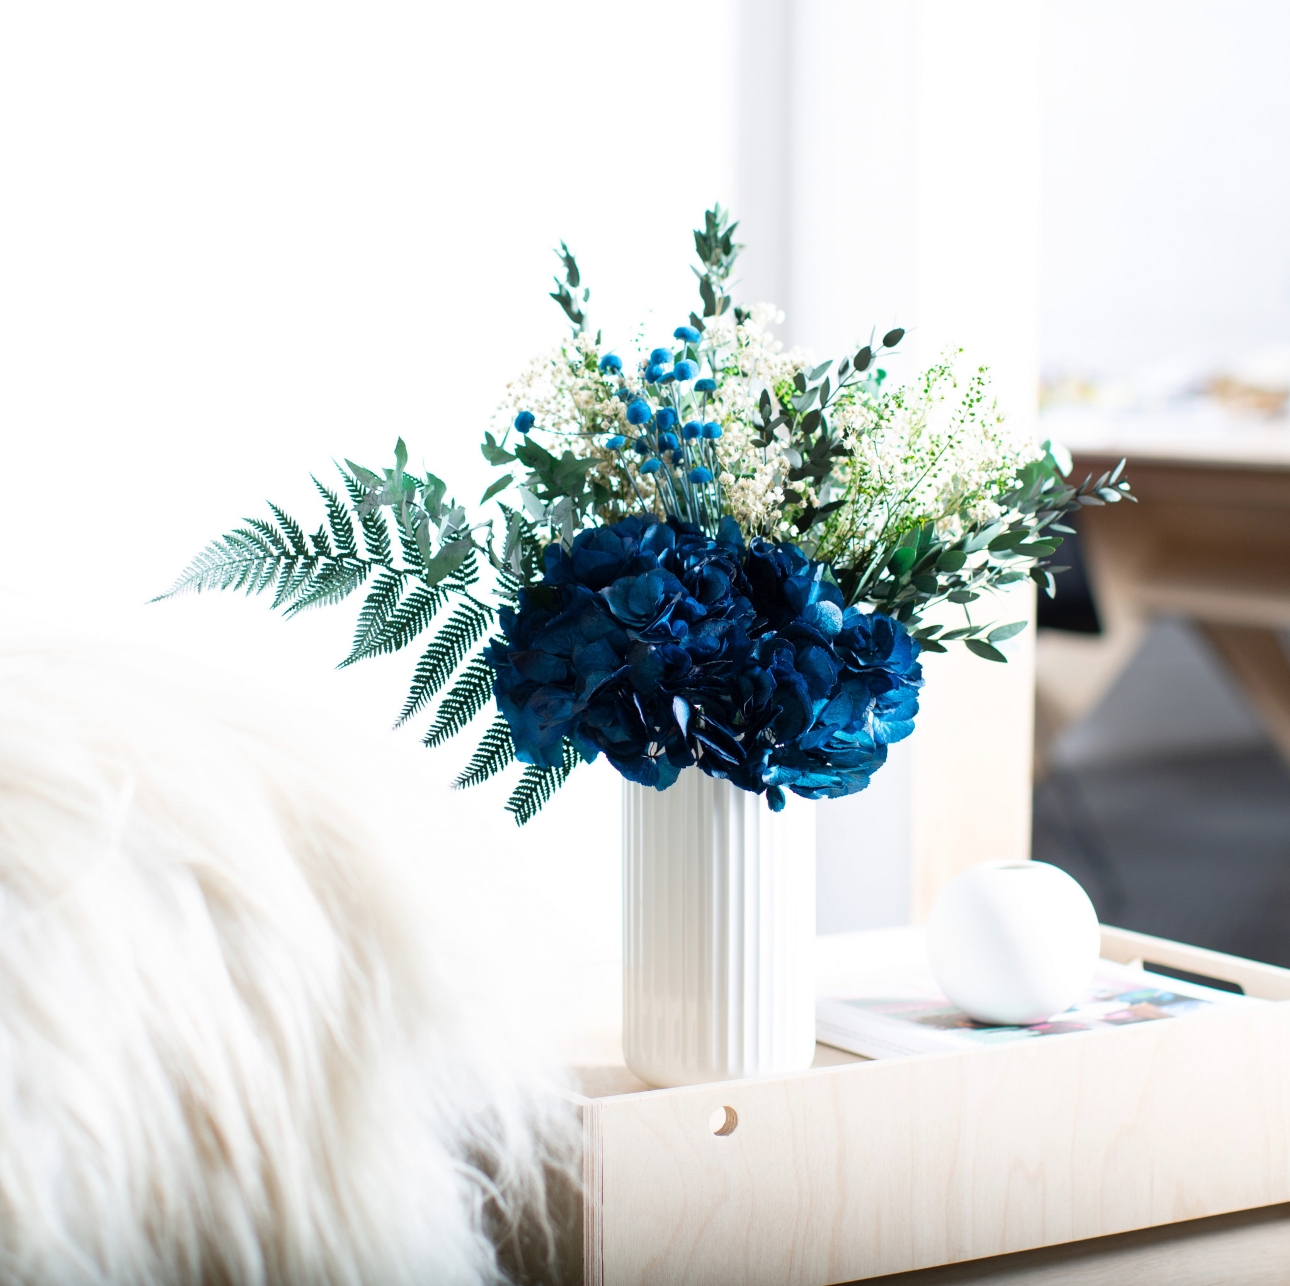 dark blue and green dried flowers displayed in a white vase